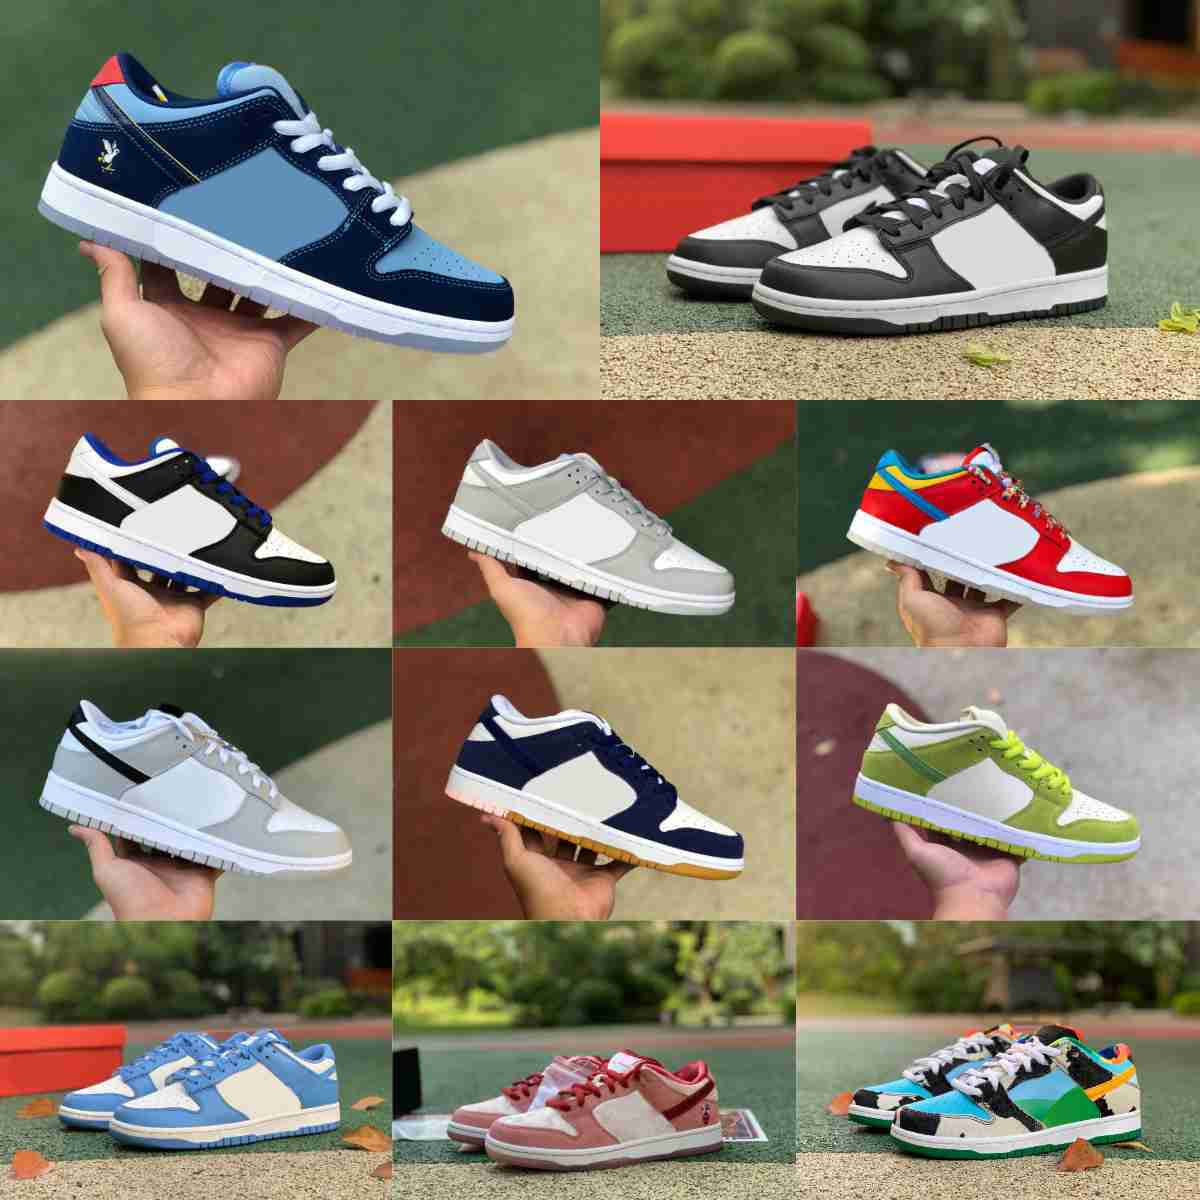 

Trainers DUNKS Mens Women Sports Shoes White Black Green SB Fruity Pebbles Orange Lobster Grey Fog Why So Sad Mummy Argon LA Dodgers Phillies UNC Outdoors Sneakers S9, Please contact us